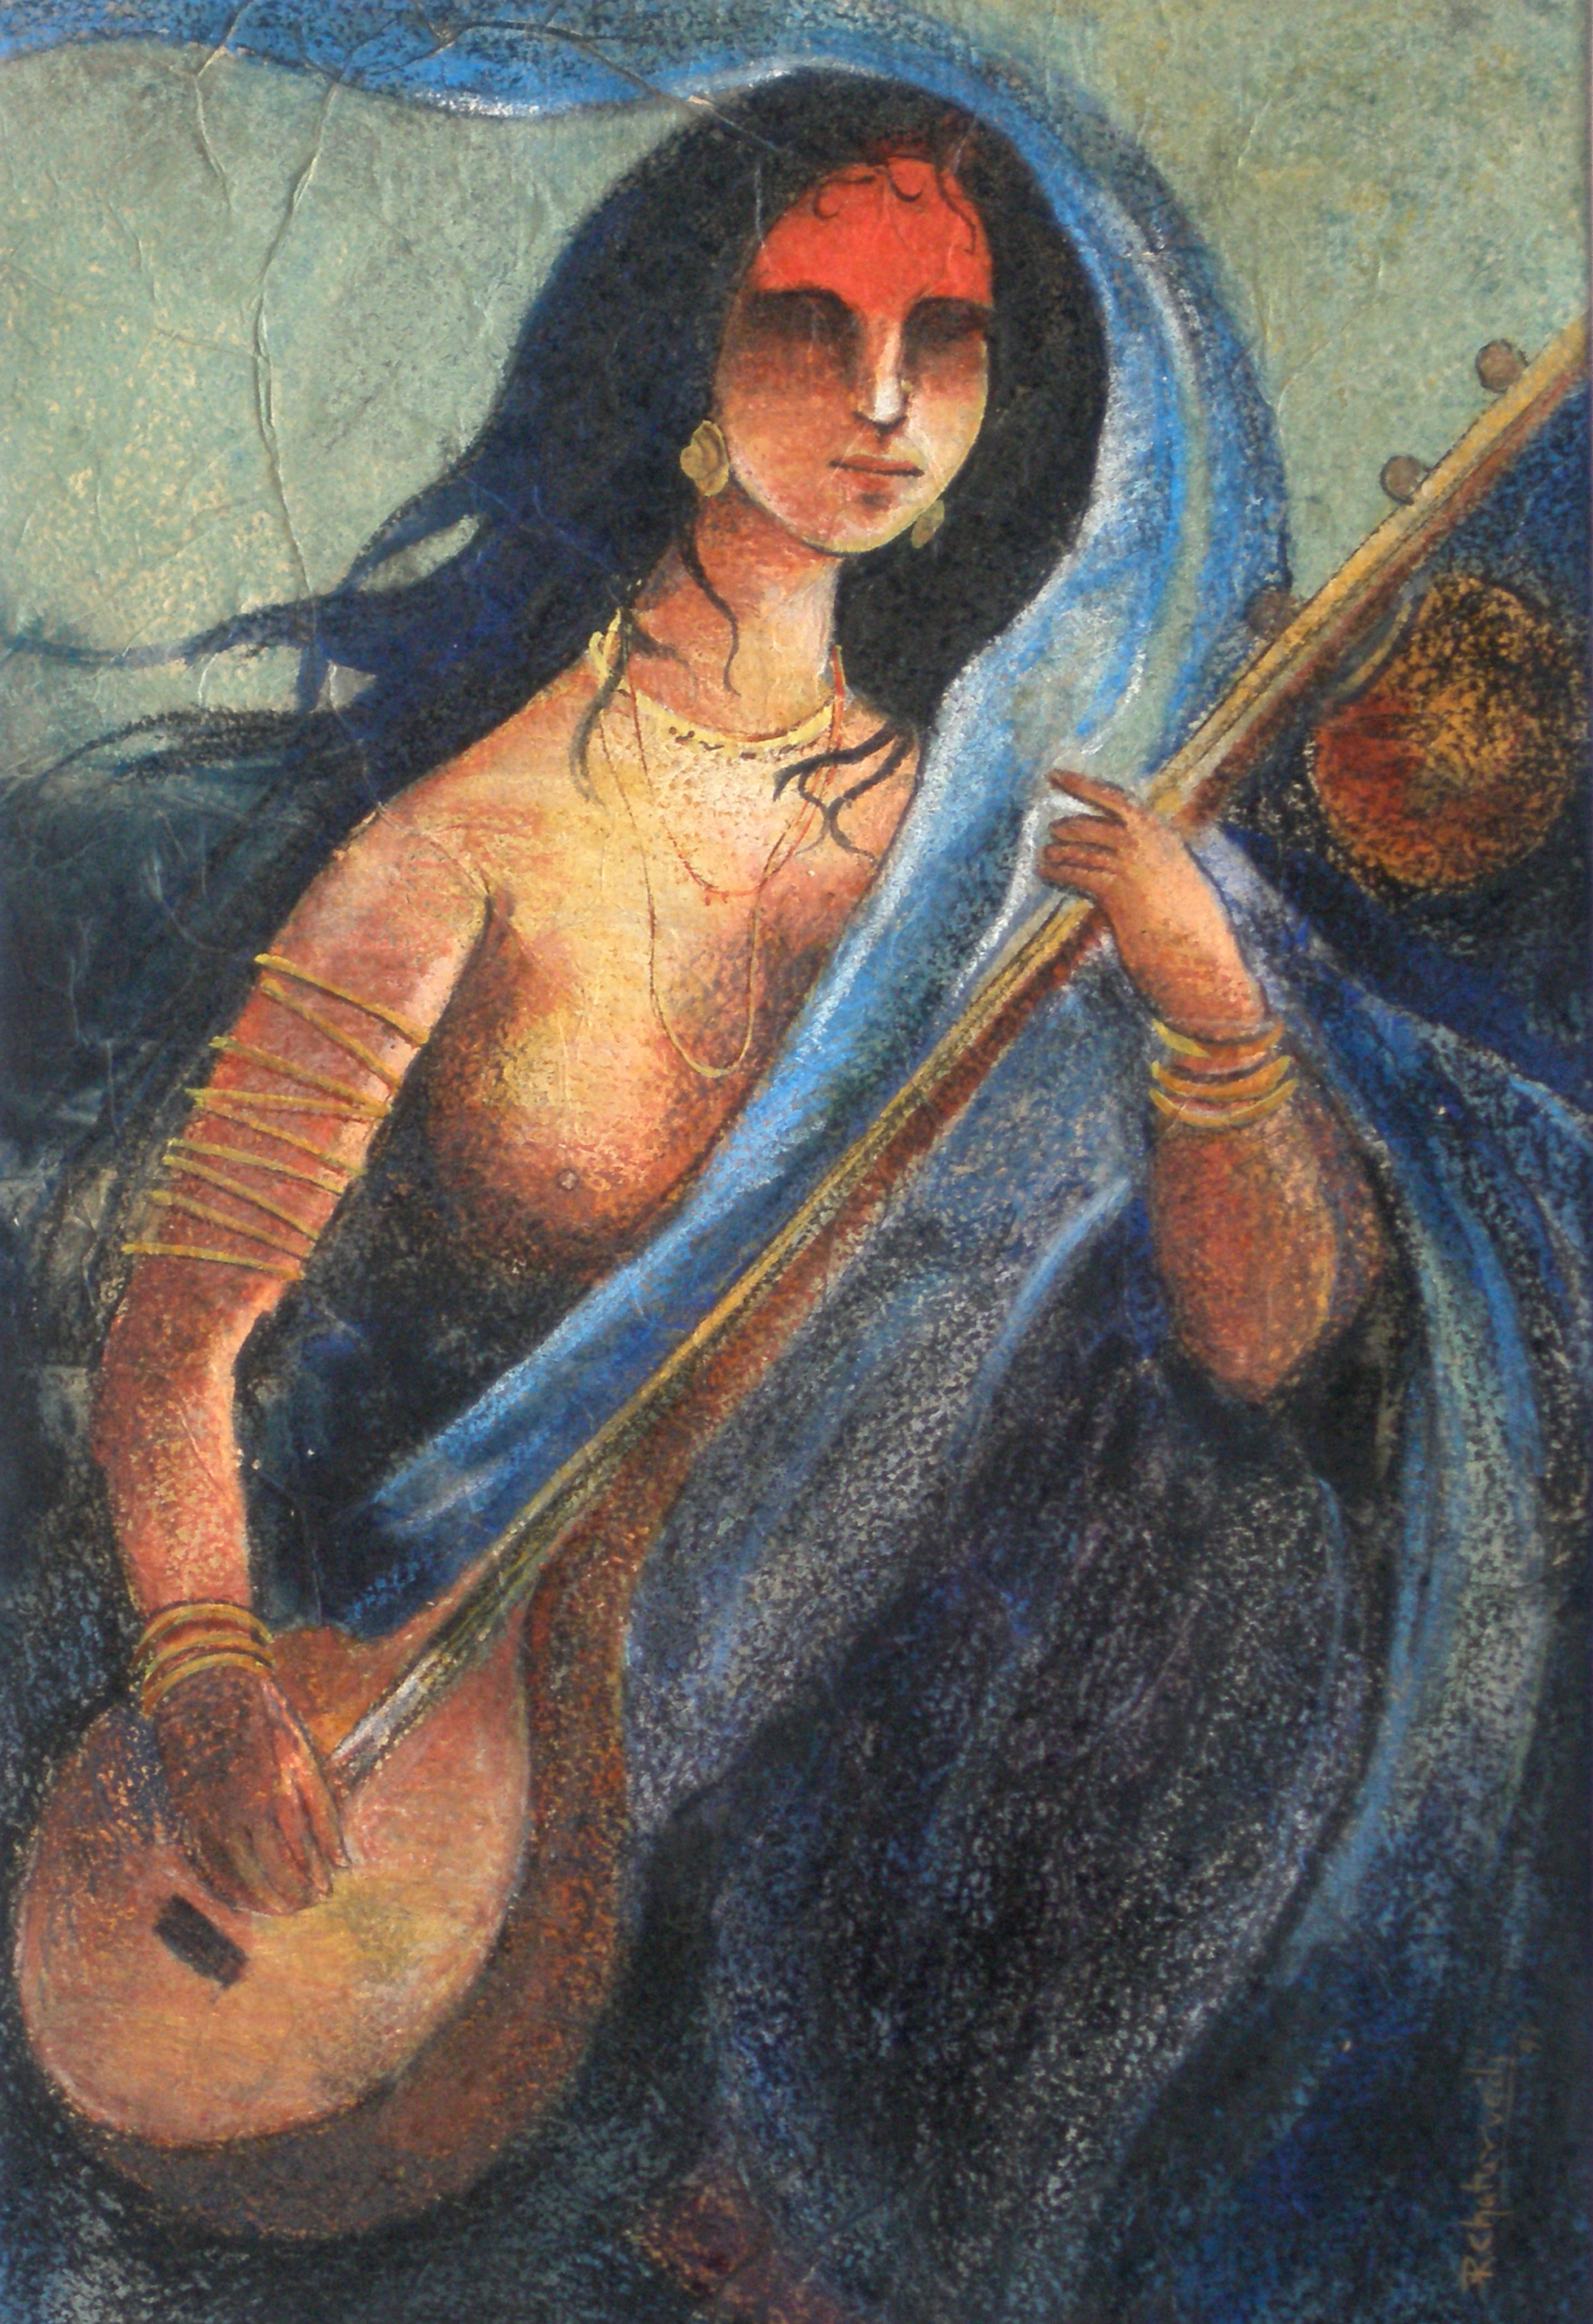 Woman with Sitar